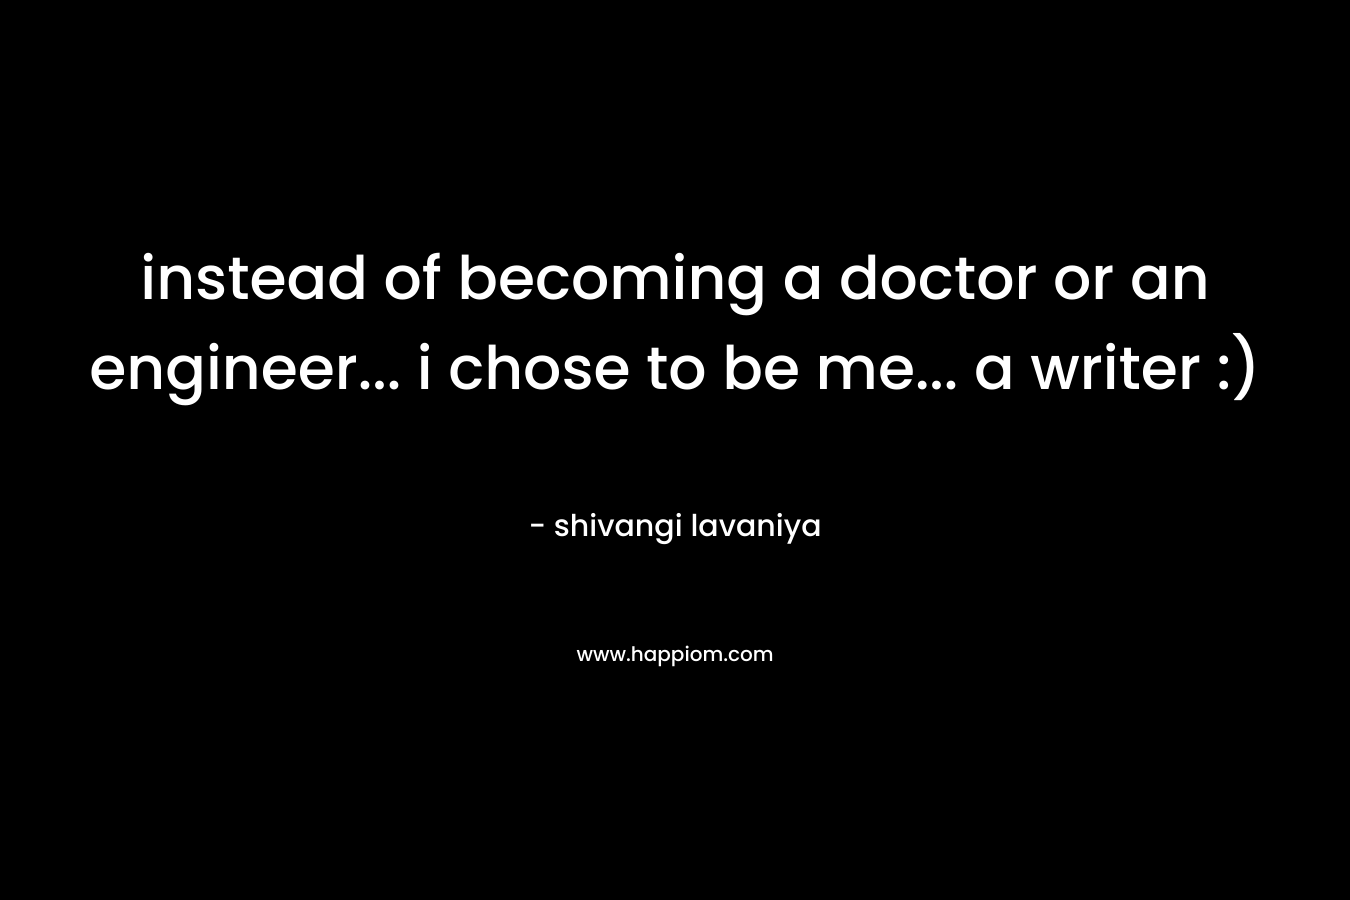 instead of becoming a doctor or an engineer... i chose to be me... a writer :)